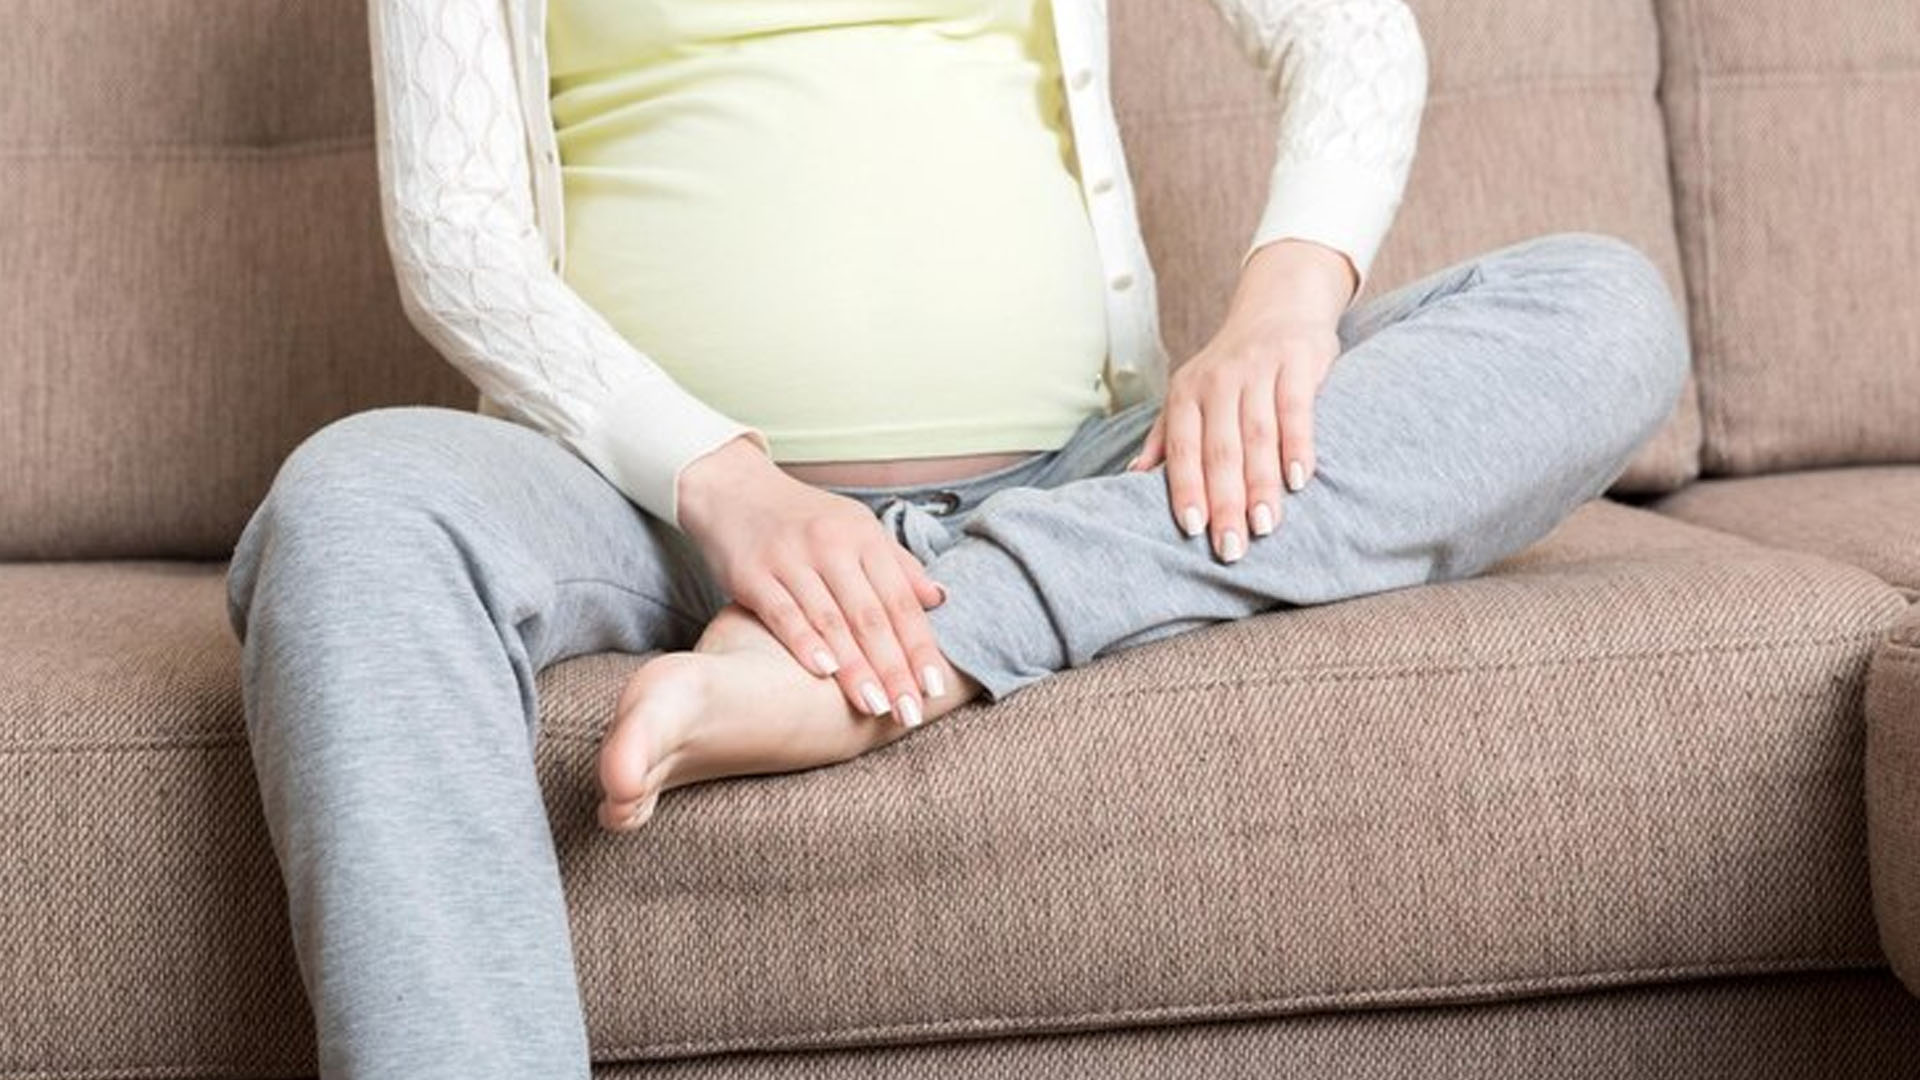 What are the Home Remedies for Leg Swelling during Pregnancy?